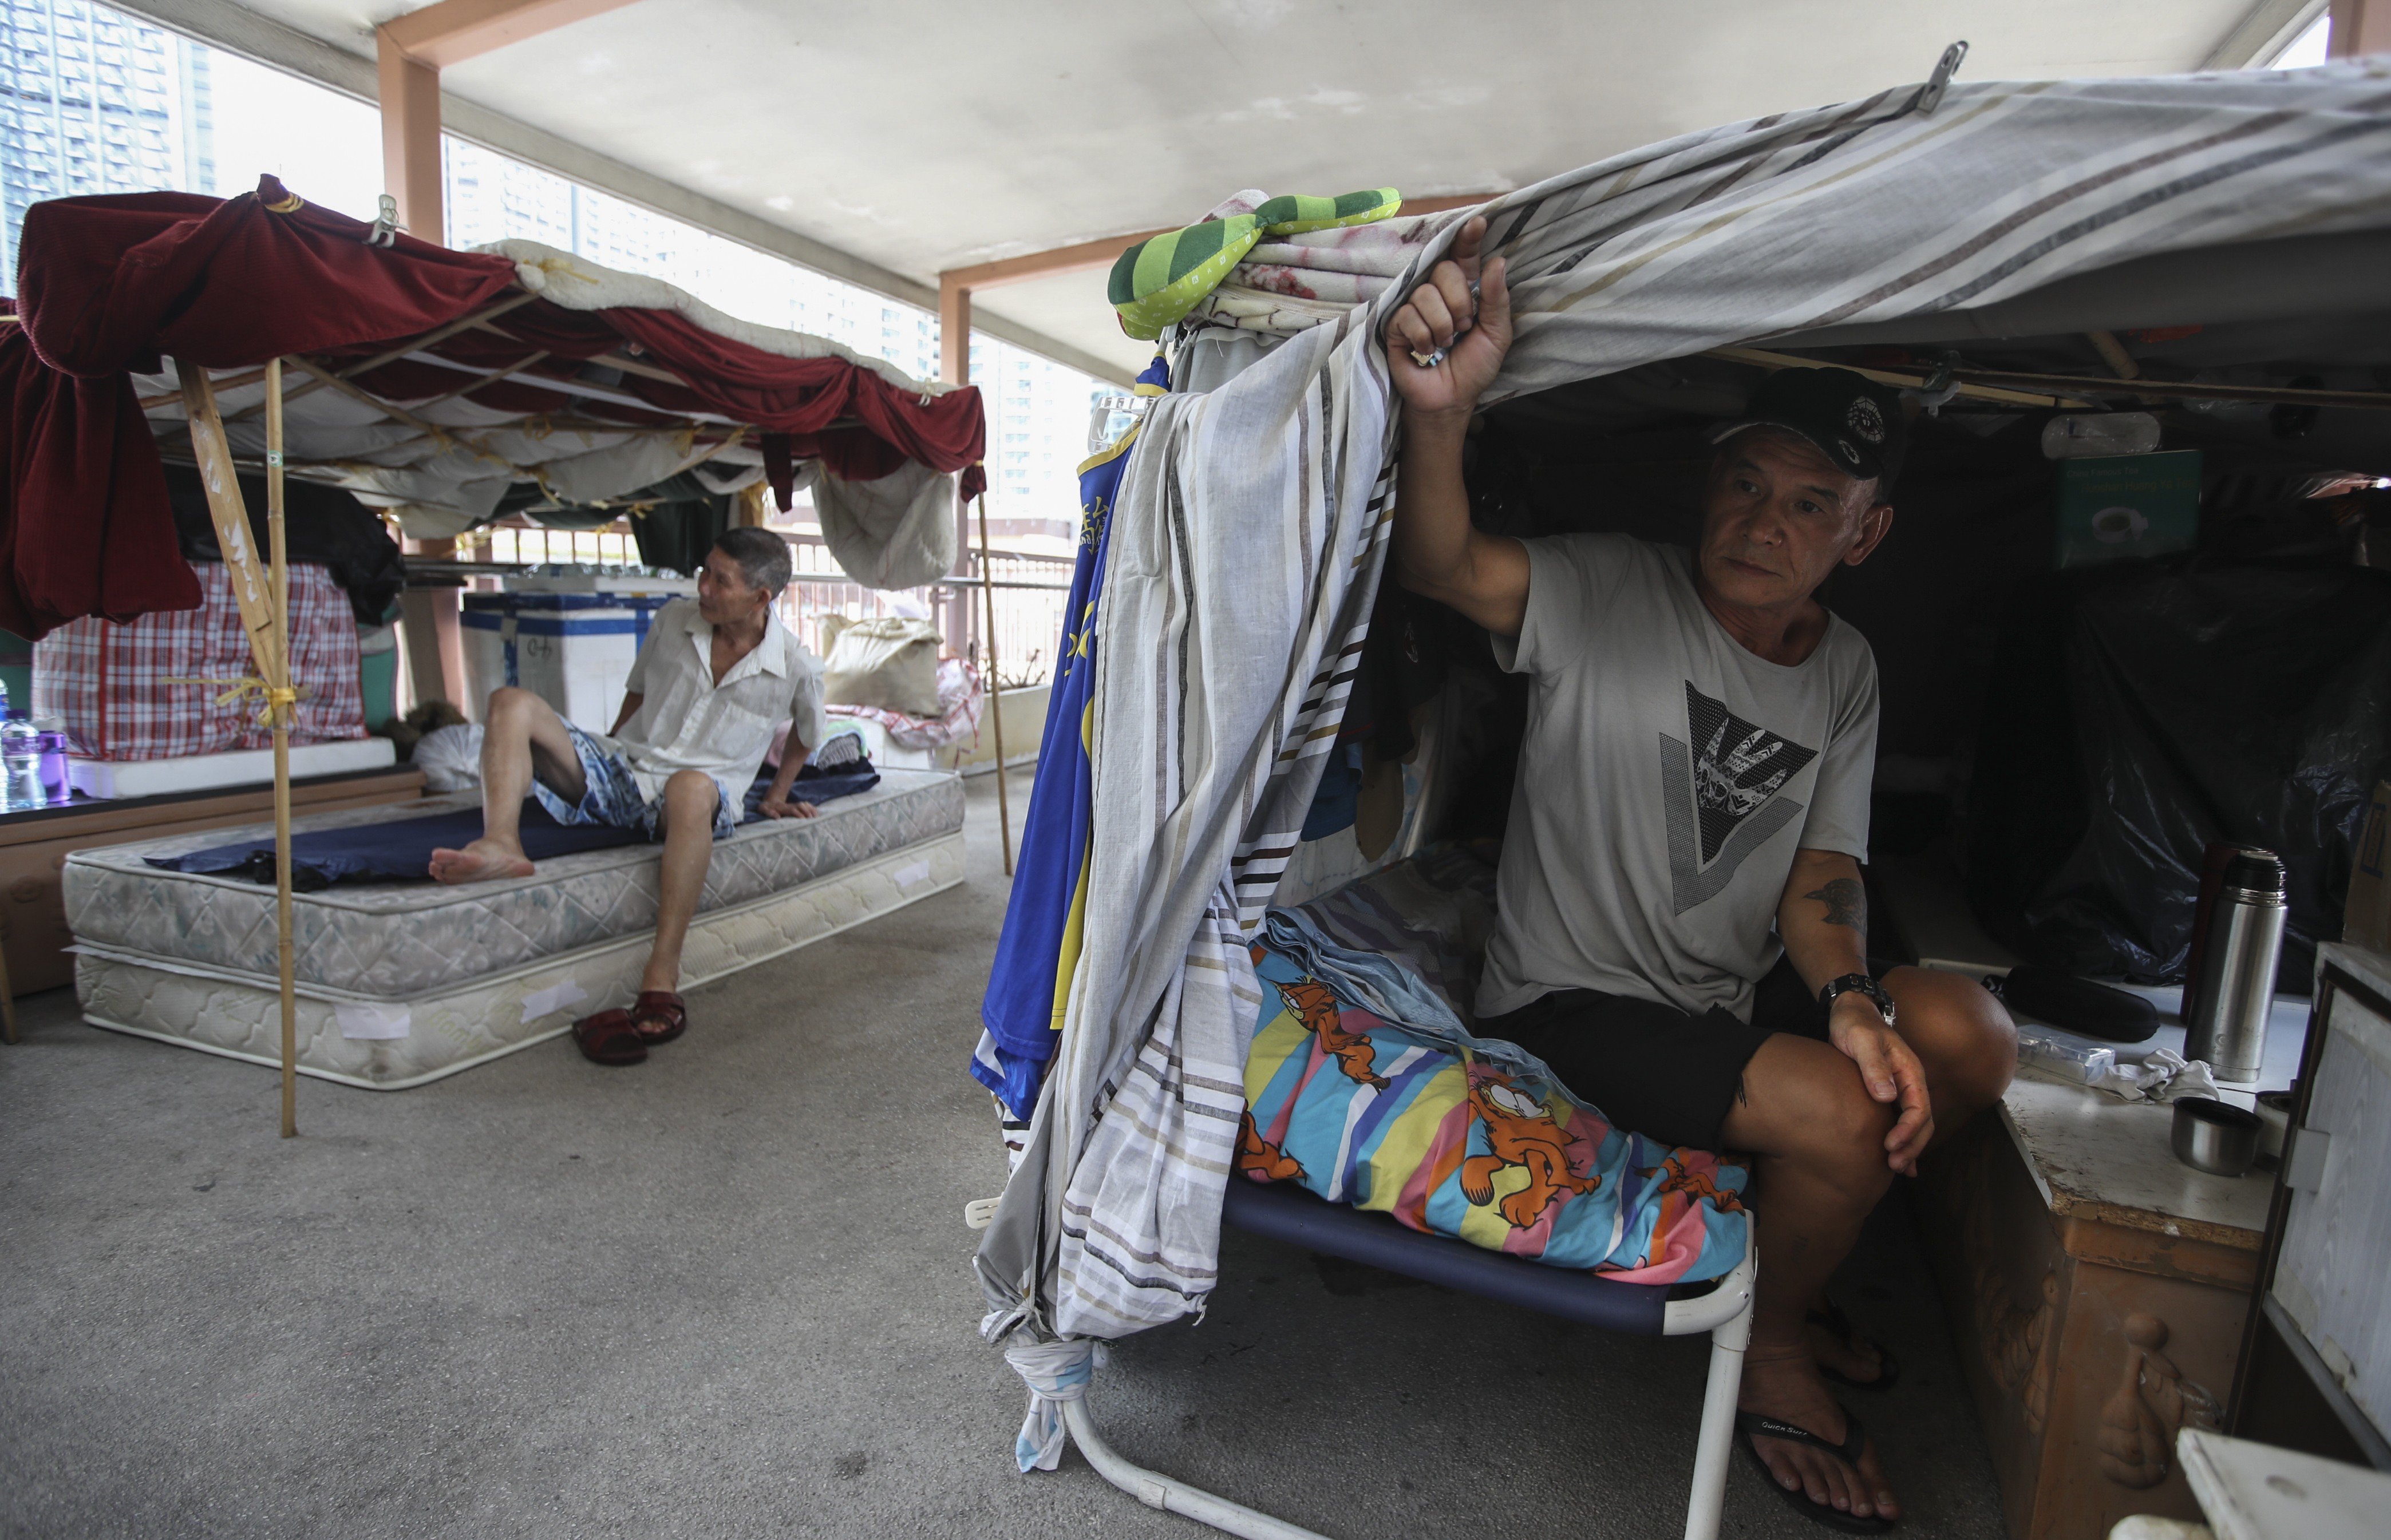 Nguyen Van Son and his neighbours on a footbridge in Sham Shui Po, Hong Kong’s poorest district, have limited options after packing up their shelters: a subdivided flat, a ‘coffin home’, or another street berth